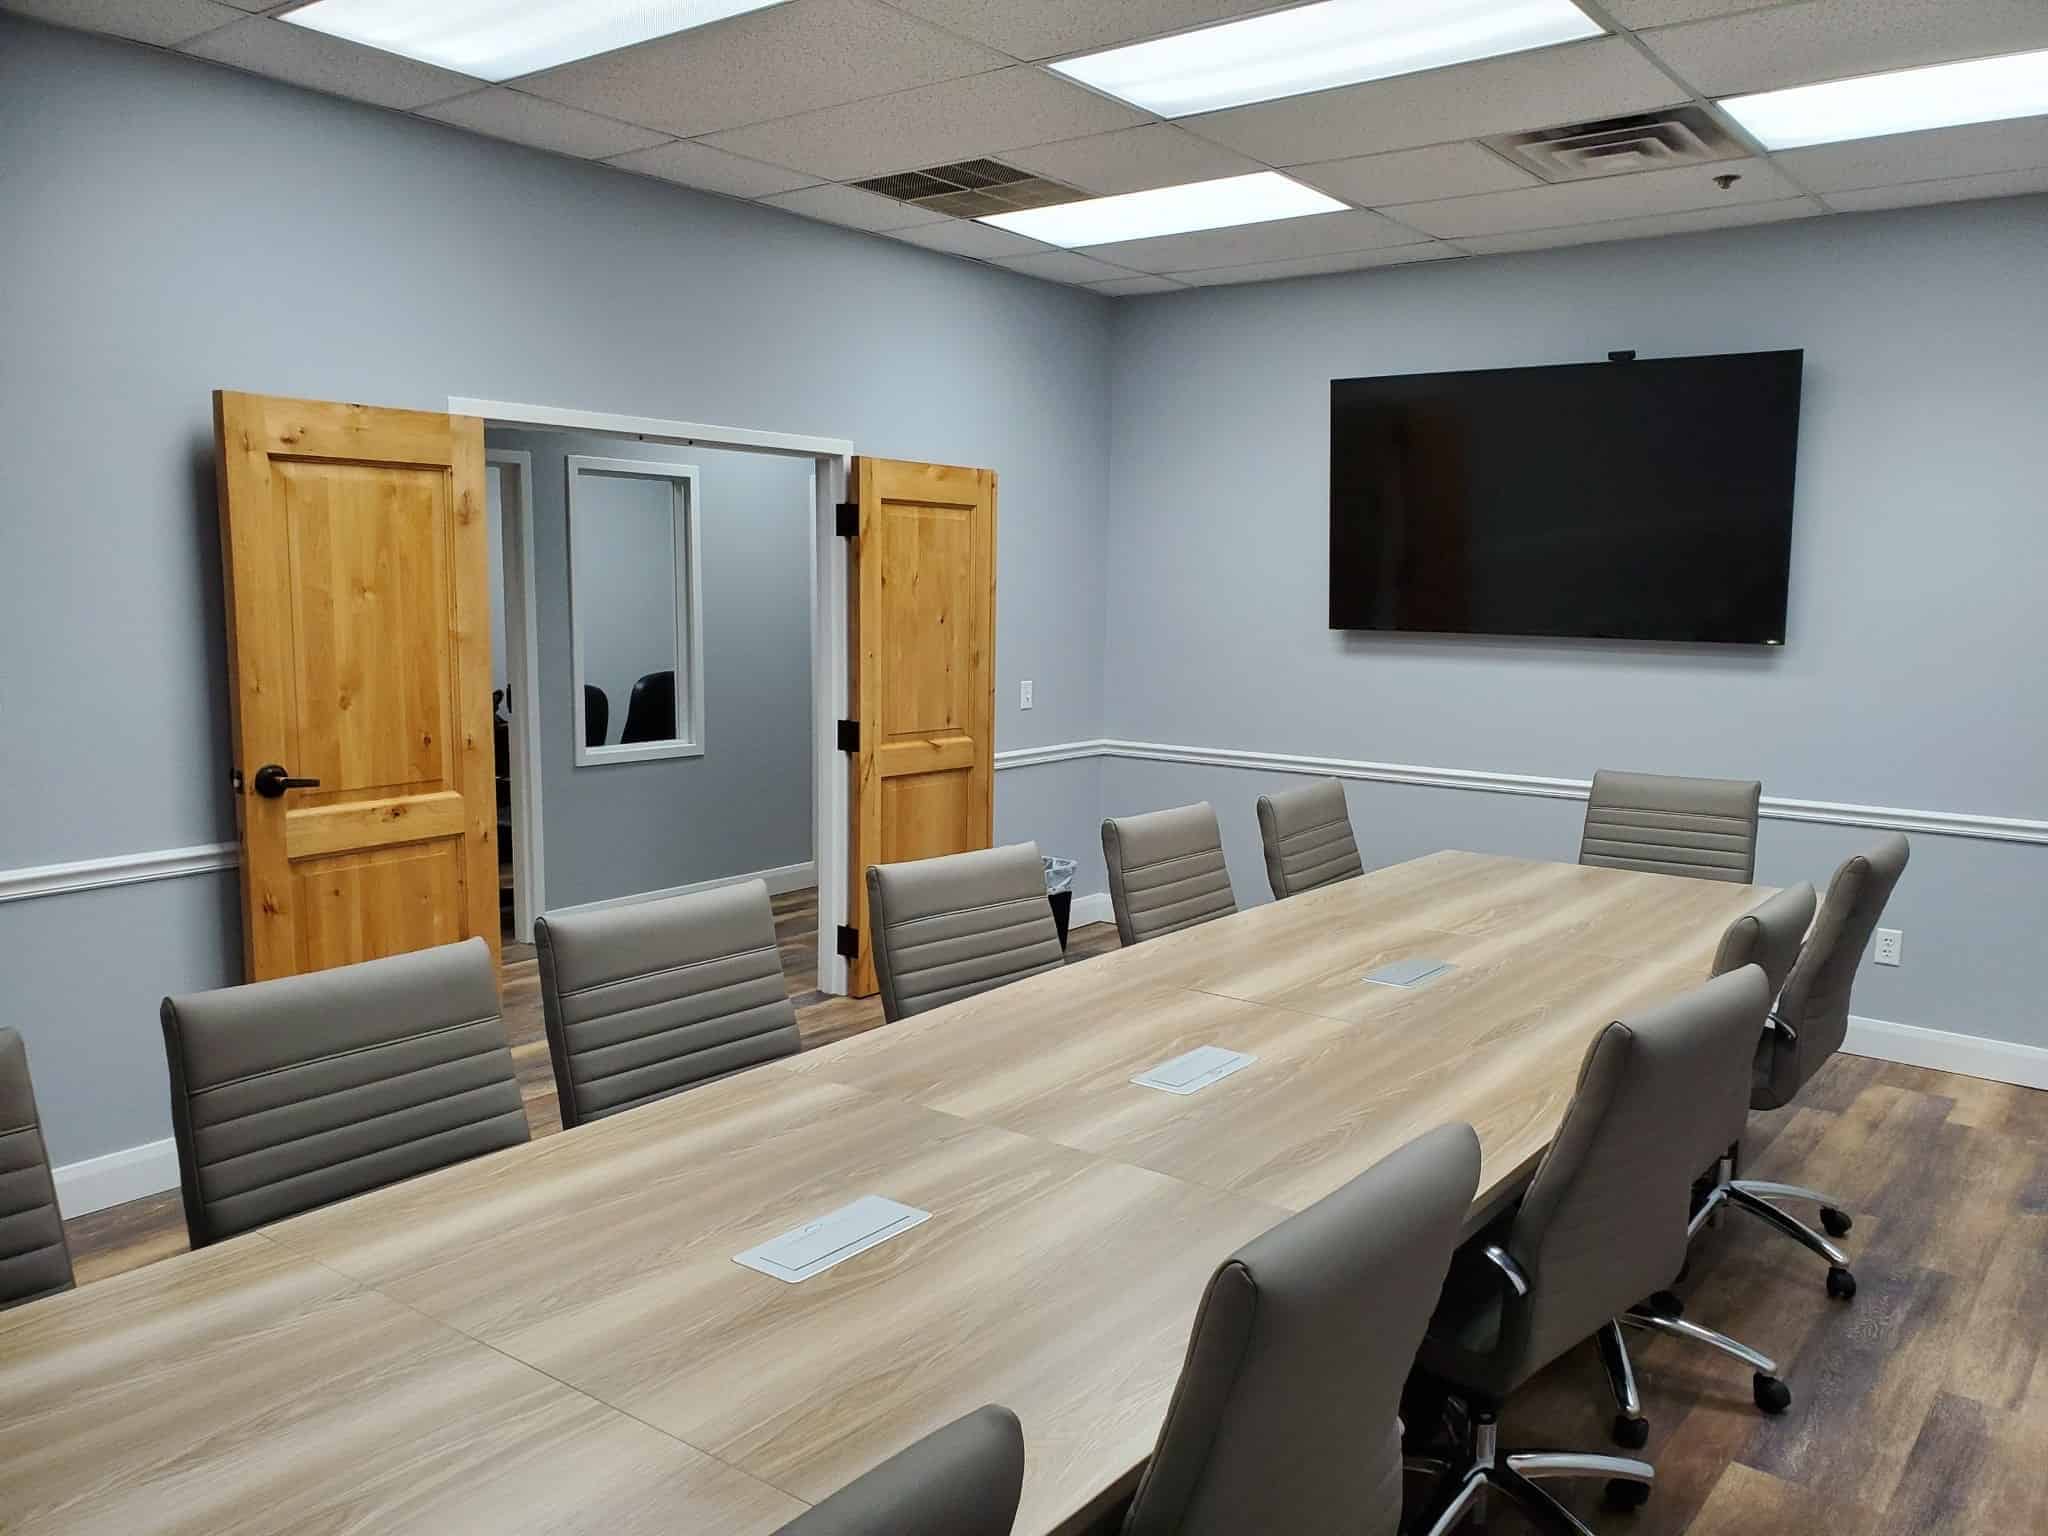 Image of Skymail's new conference room.